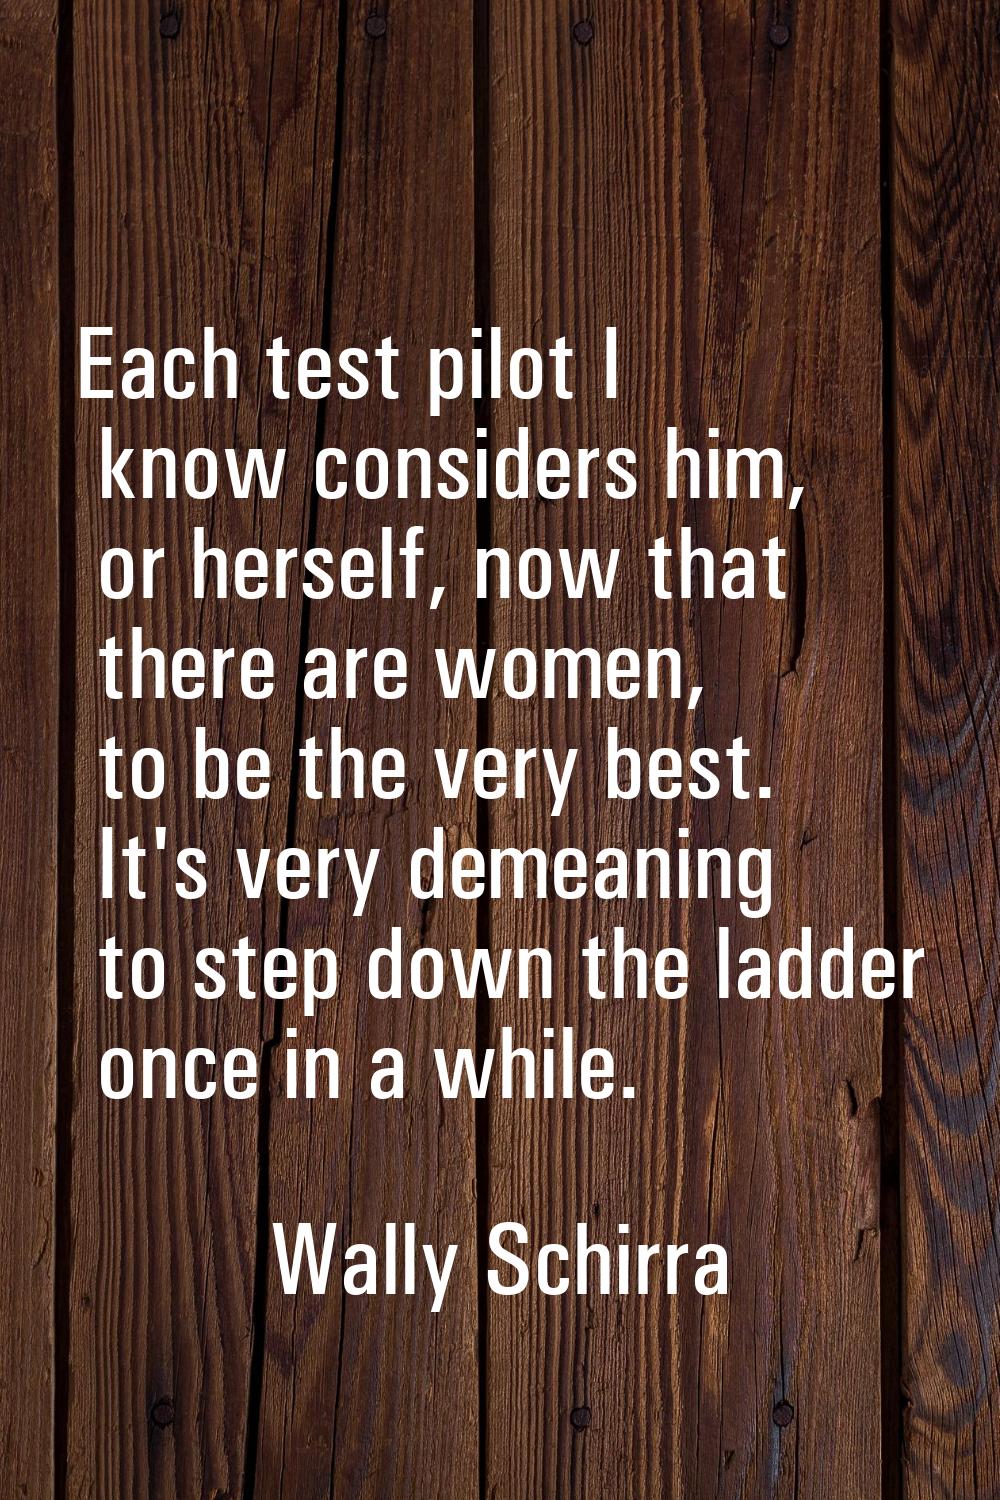 Each test pilot I know considers him, or herself, now that there are women, to be the very best. It